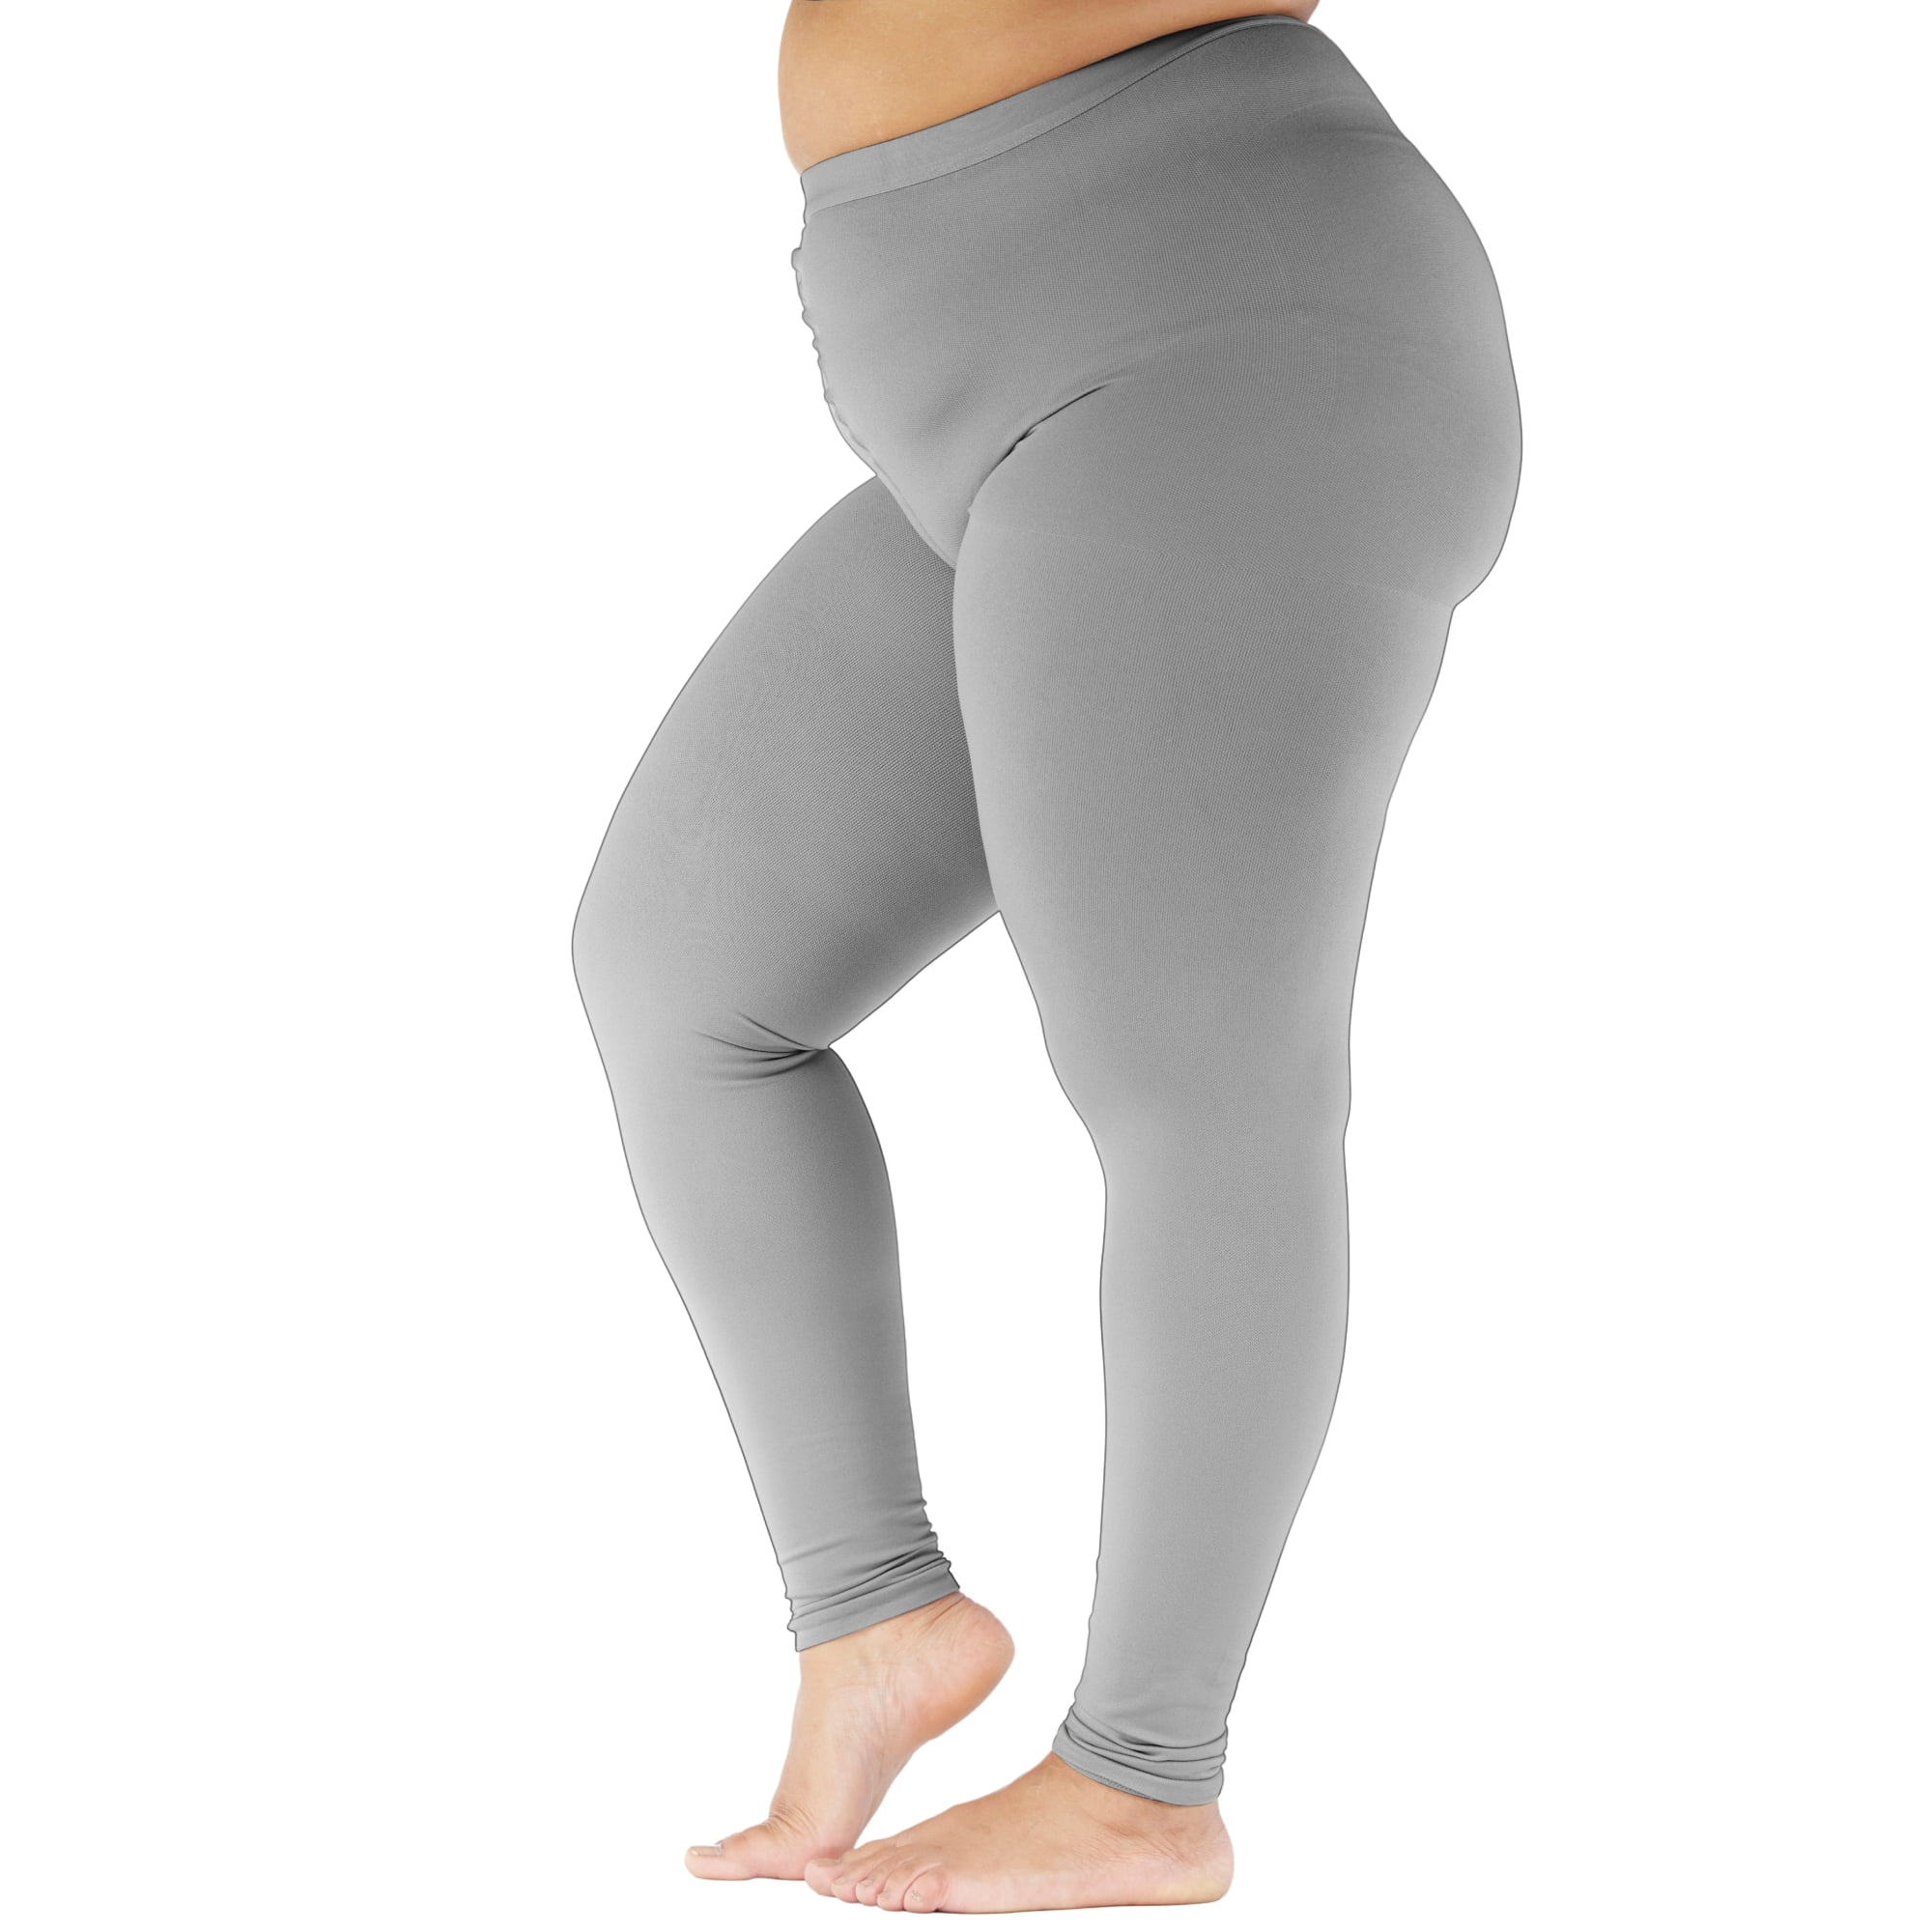 3XL Extra Wide Compression Leggings for Swelling 20-30mmHg - Grey, 3X-Large  